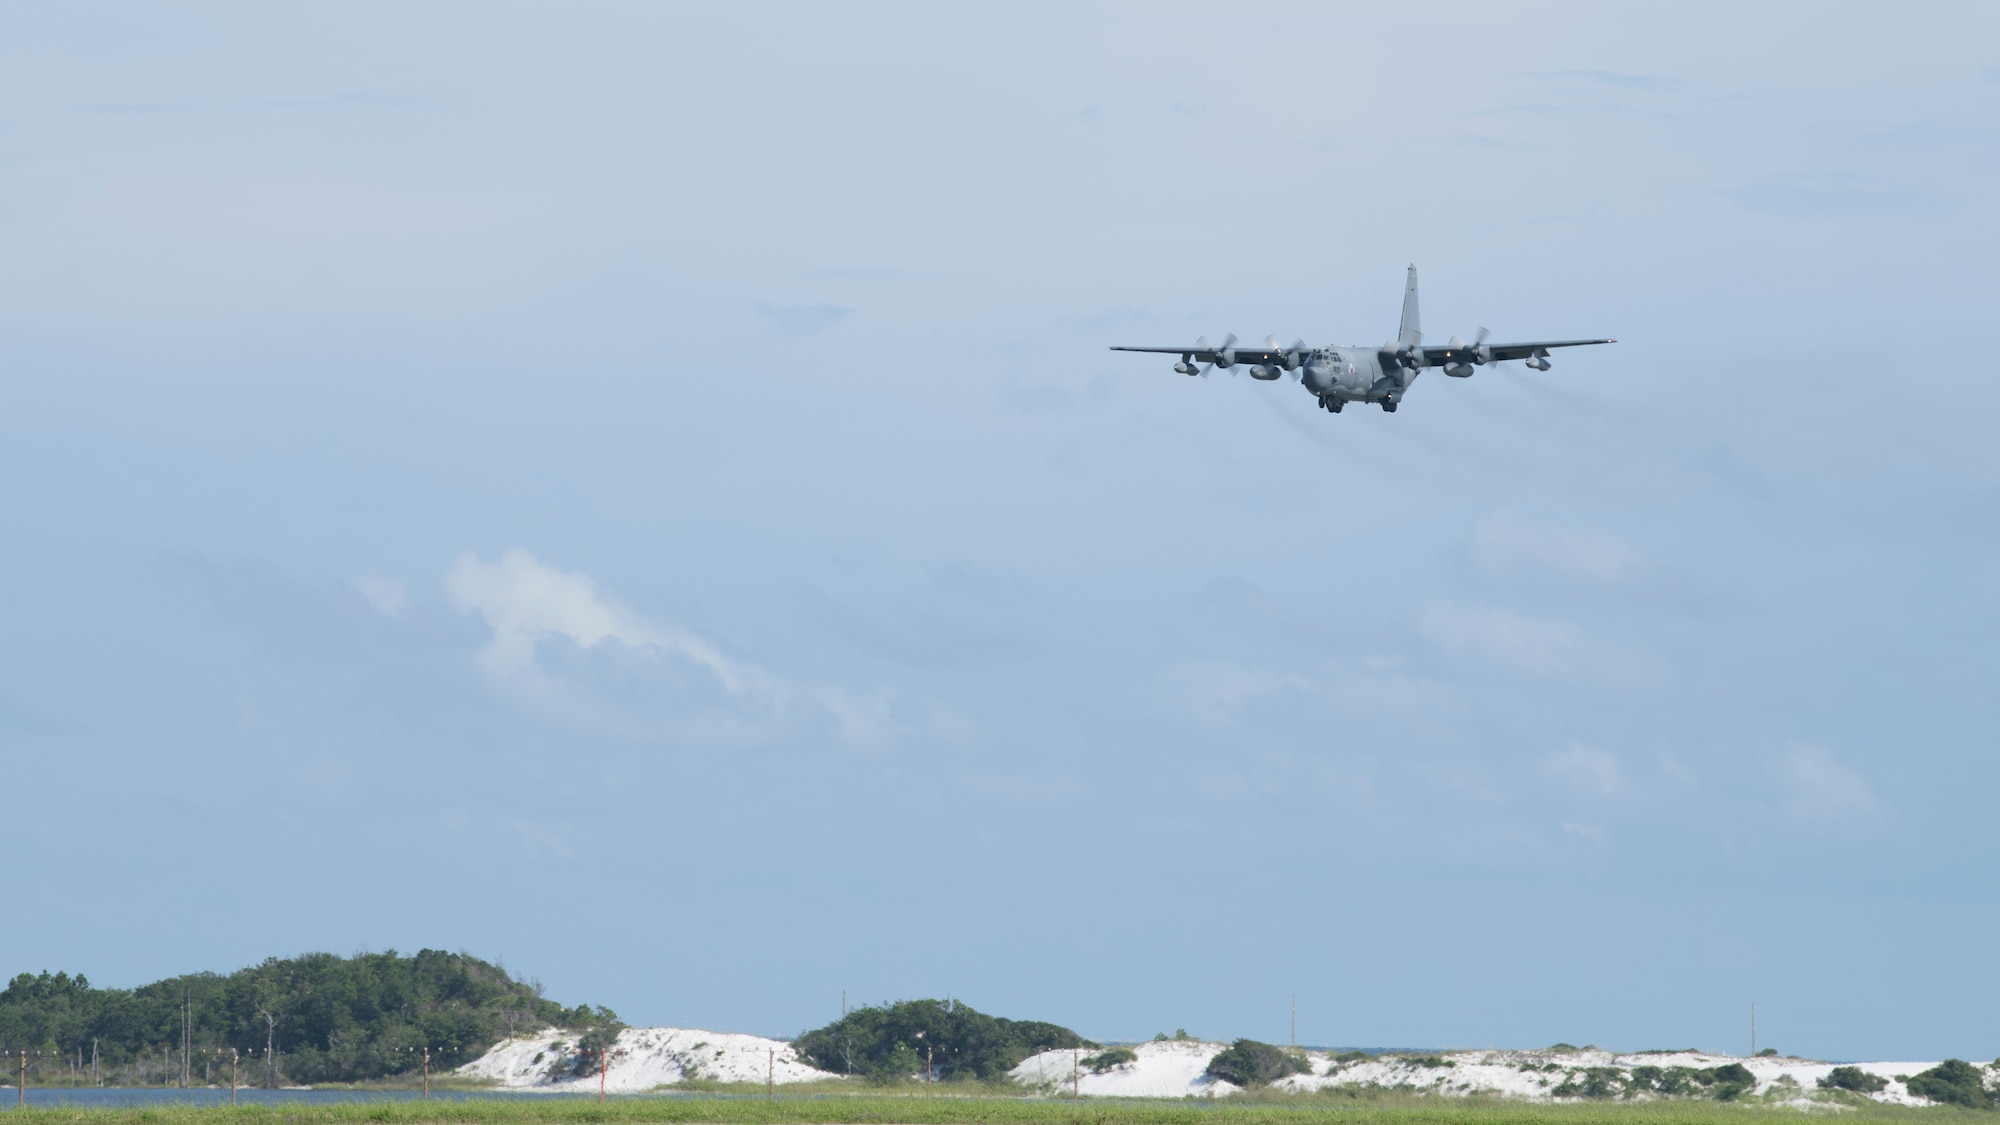 An MC-130H Combat Talon II assigned to the 15th Special Operations Squadron lands after a training sortie at Hurlburt Field, Florida, July 21, 2021.